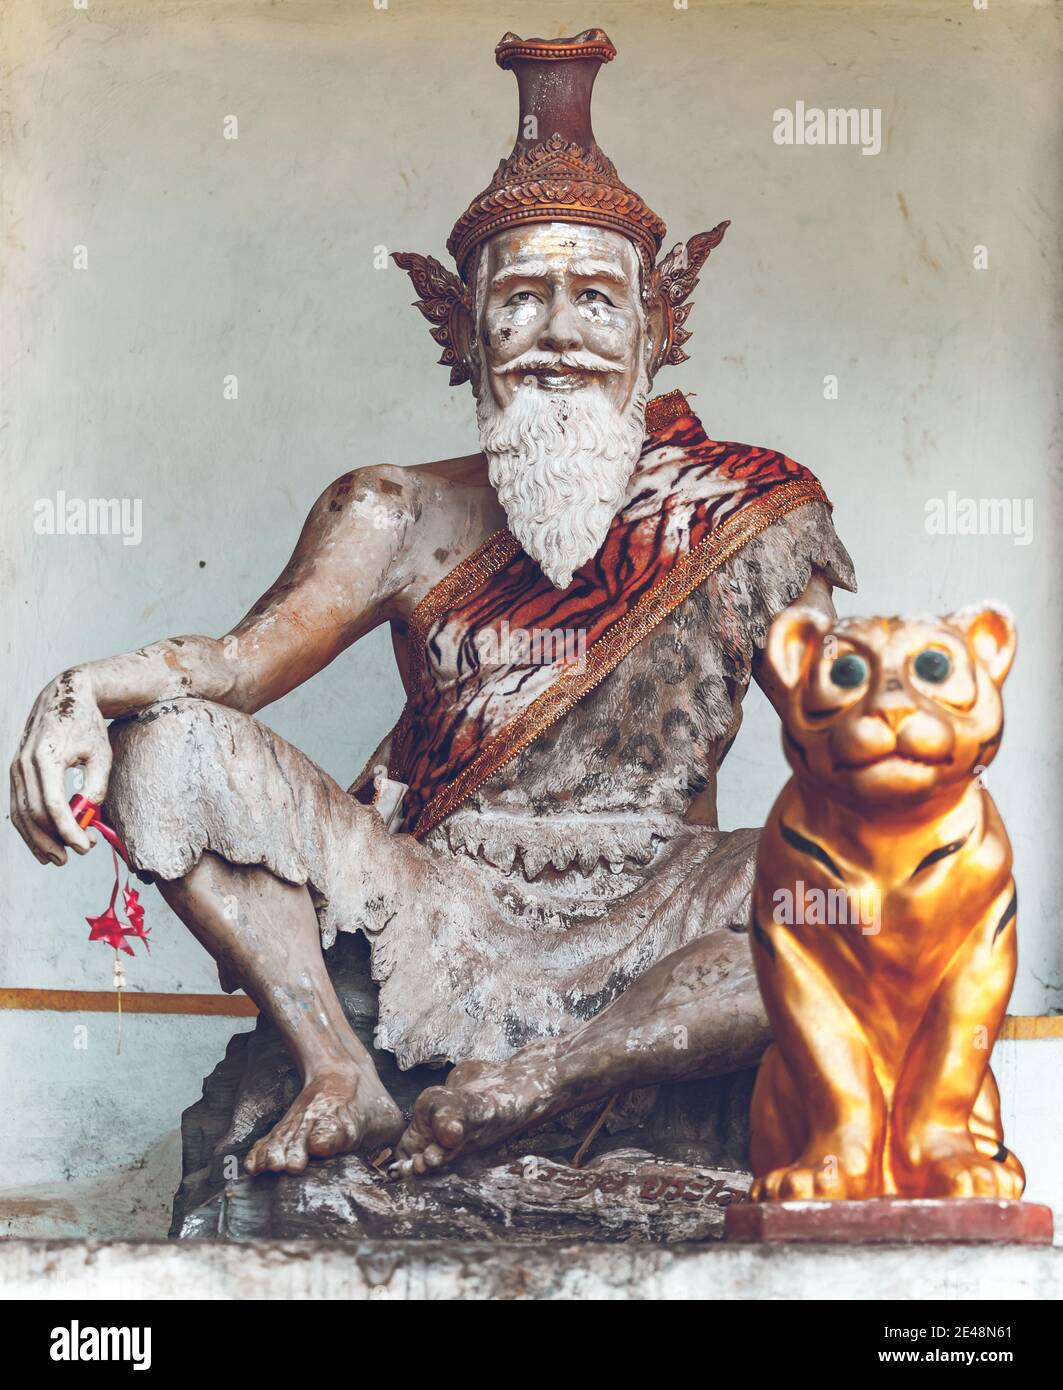 Thailand, closeup religious sculpture in Tigre Cave Temple (Wat Tham Sua), Asia. Majestic buddhism sanctuary statue with sacred animal. Asian old man and tiger scene monument at wall Stock Photo